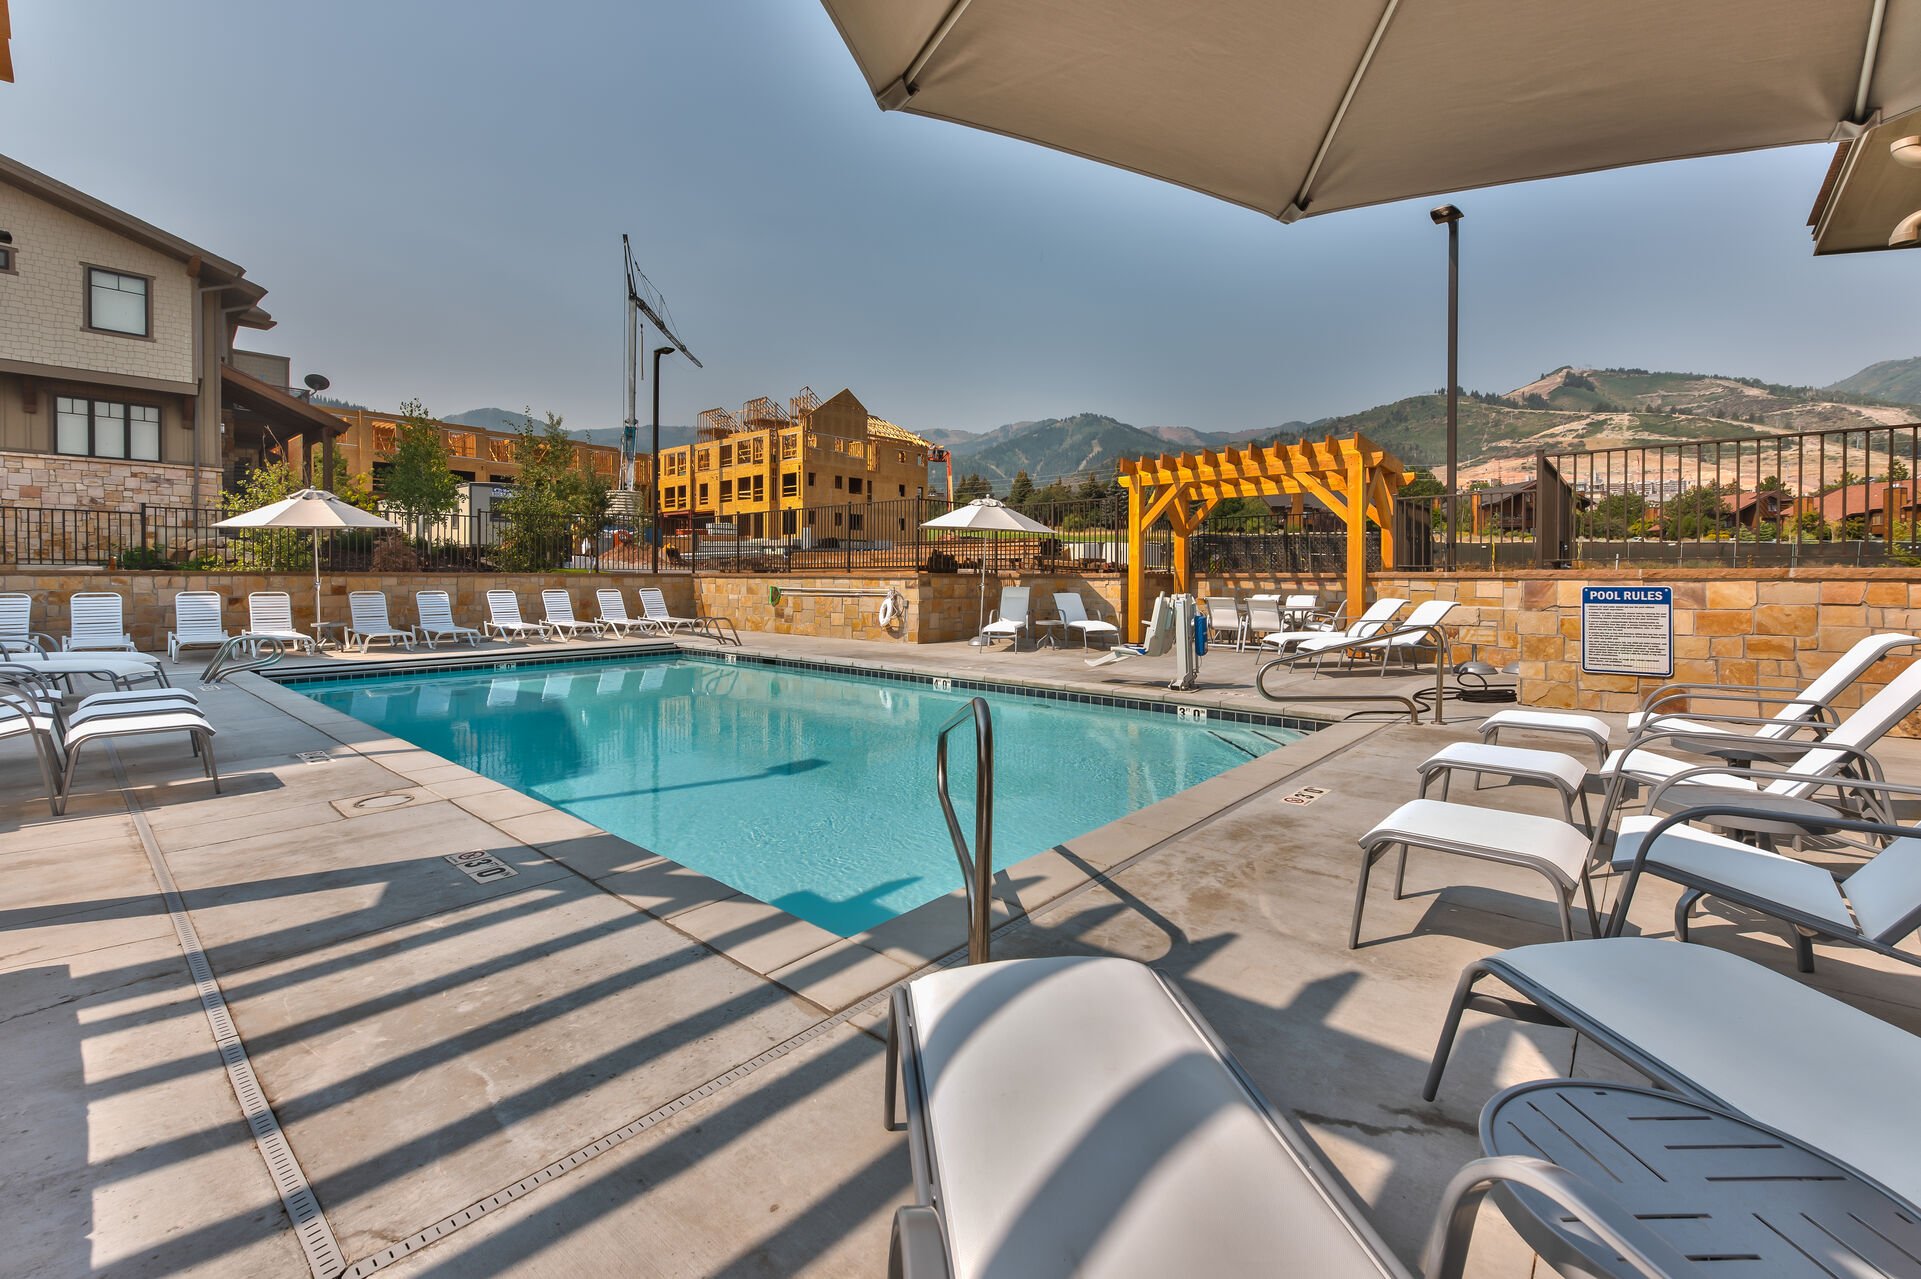 Blackstone Clubhouse with Year-round Heated Pool, Hot Tub and Plenty of Patio Seating